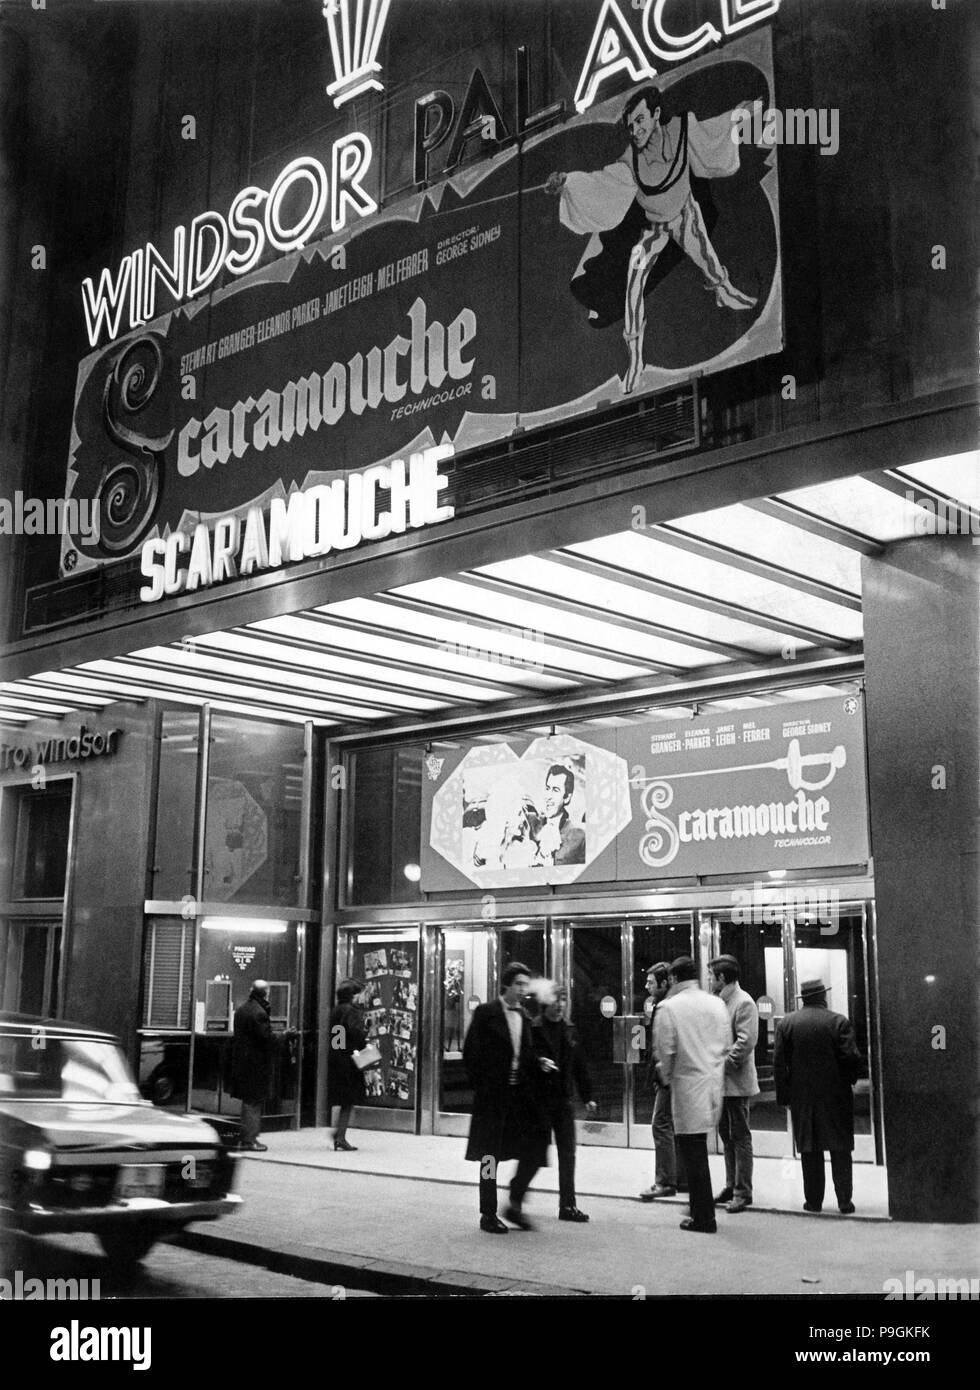 Façade of old cinema Windsor in Barcelona with neon signs advertising the film Scaromouche, 1952. Stock Photo